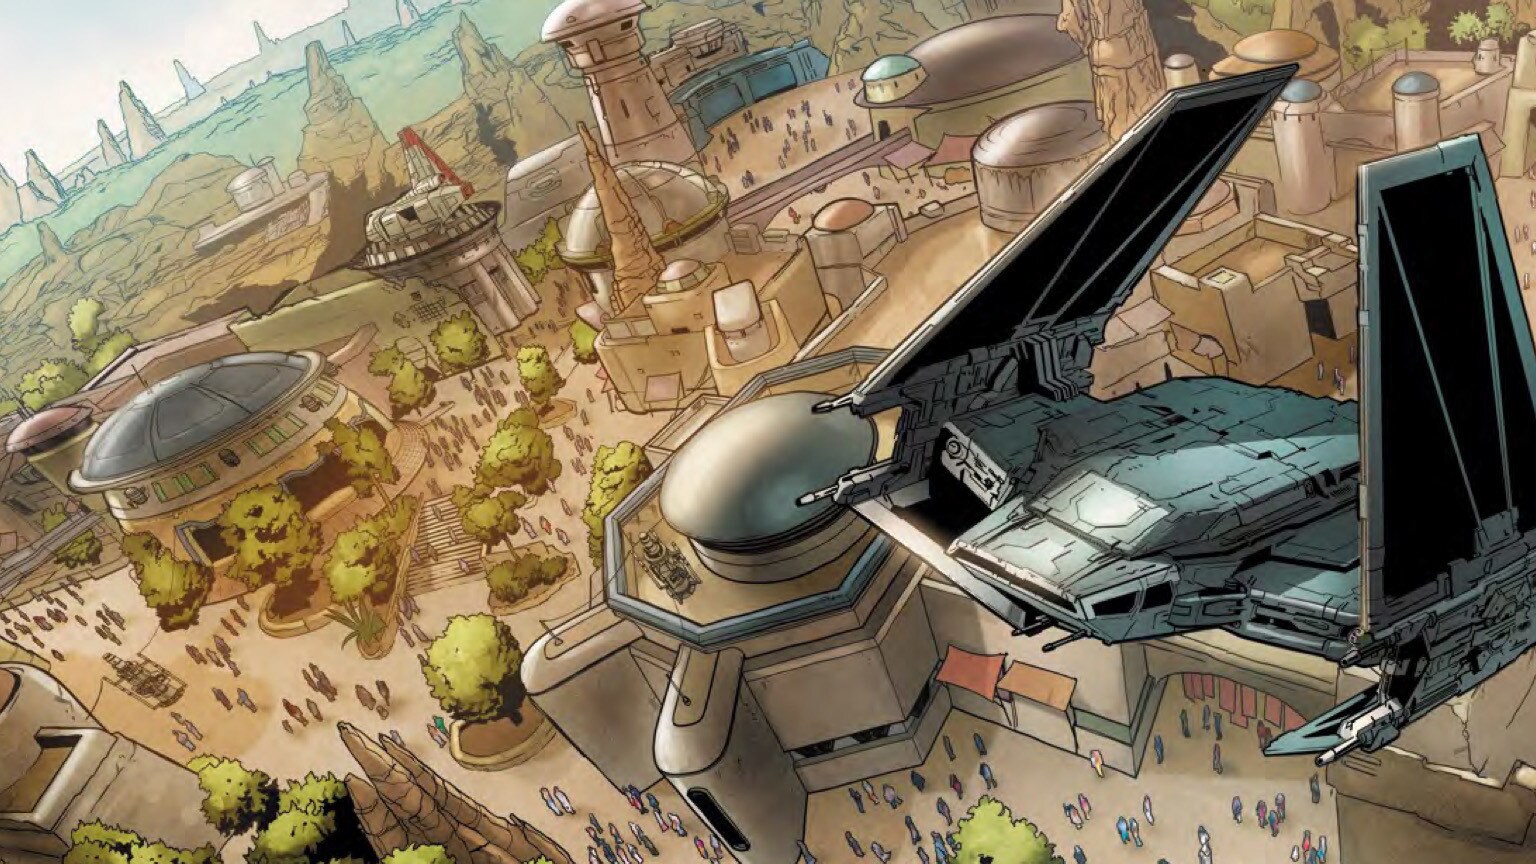 SWCC 2019: Marvel's Star Wars: Galaxy's Edge #1 Art and More Revealed